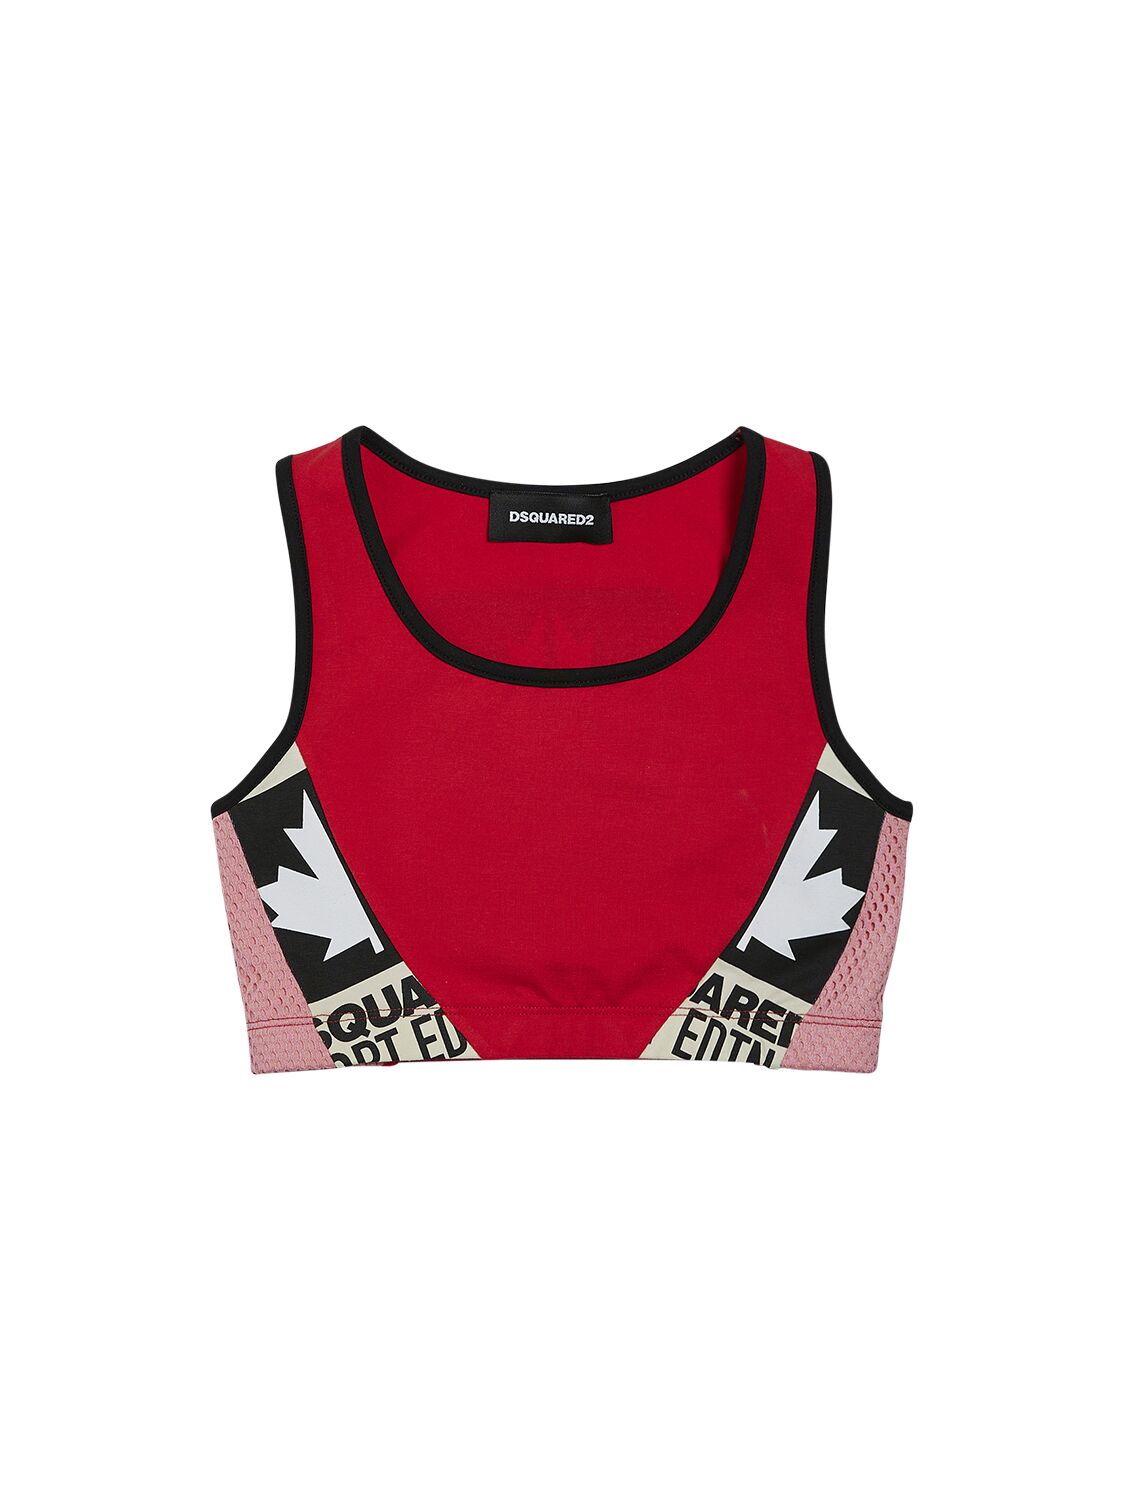 Image of Stretch Cotton Jersey Crop Top